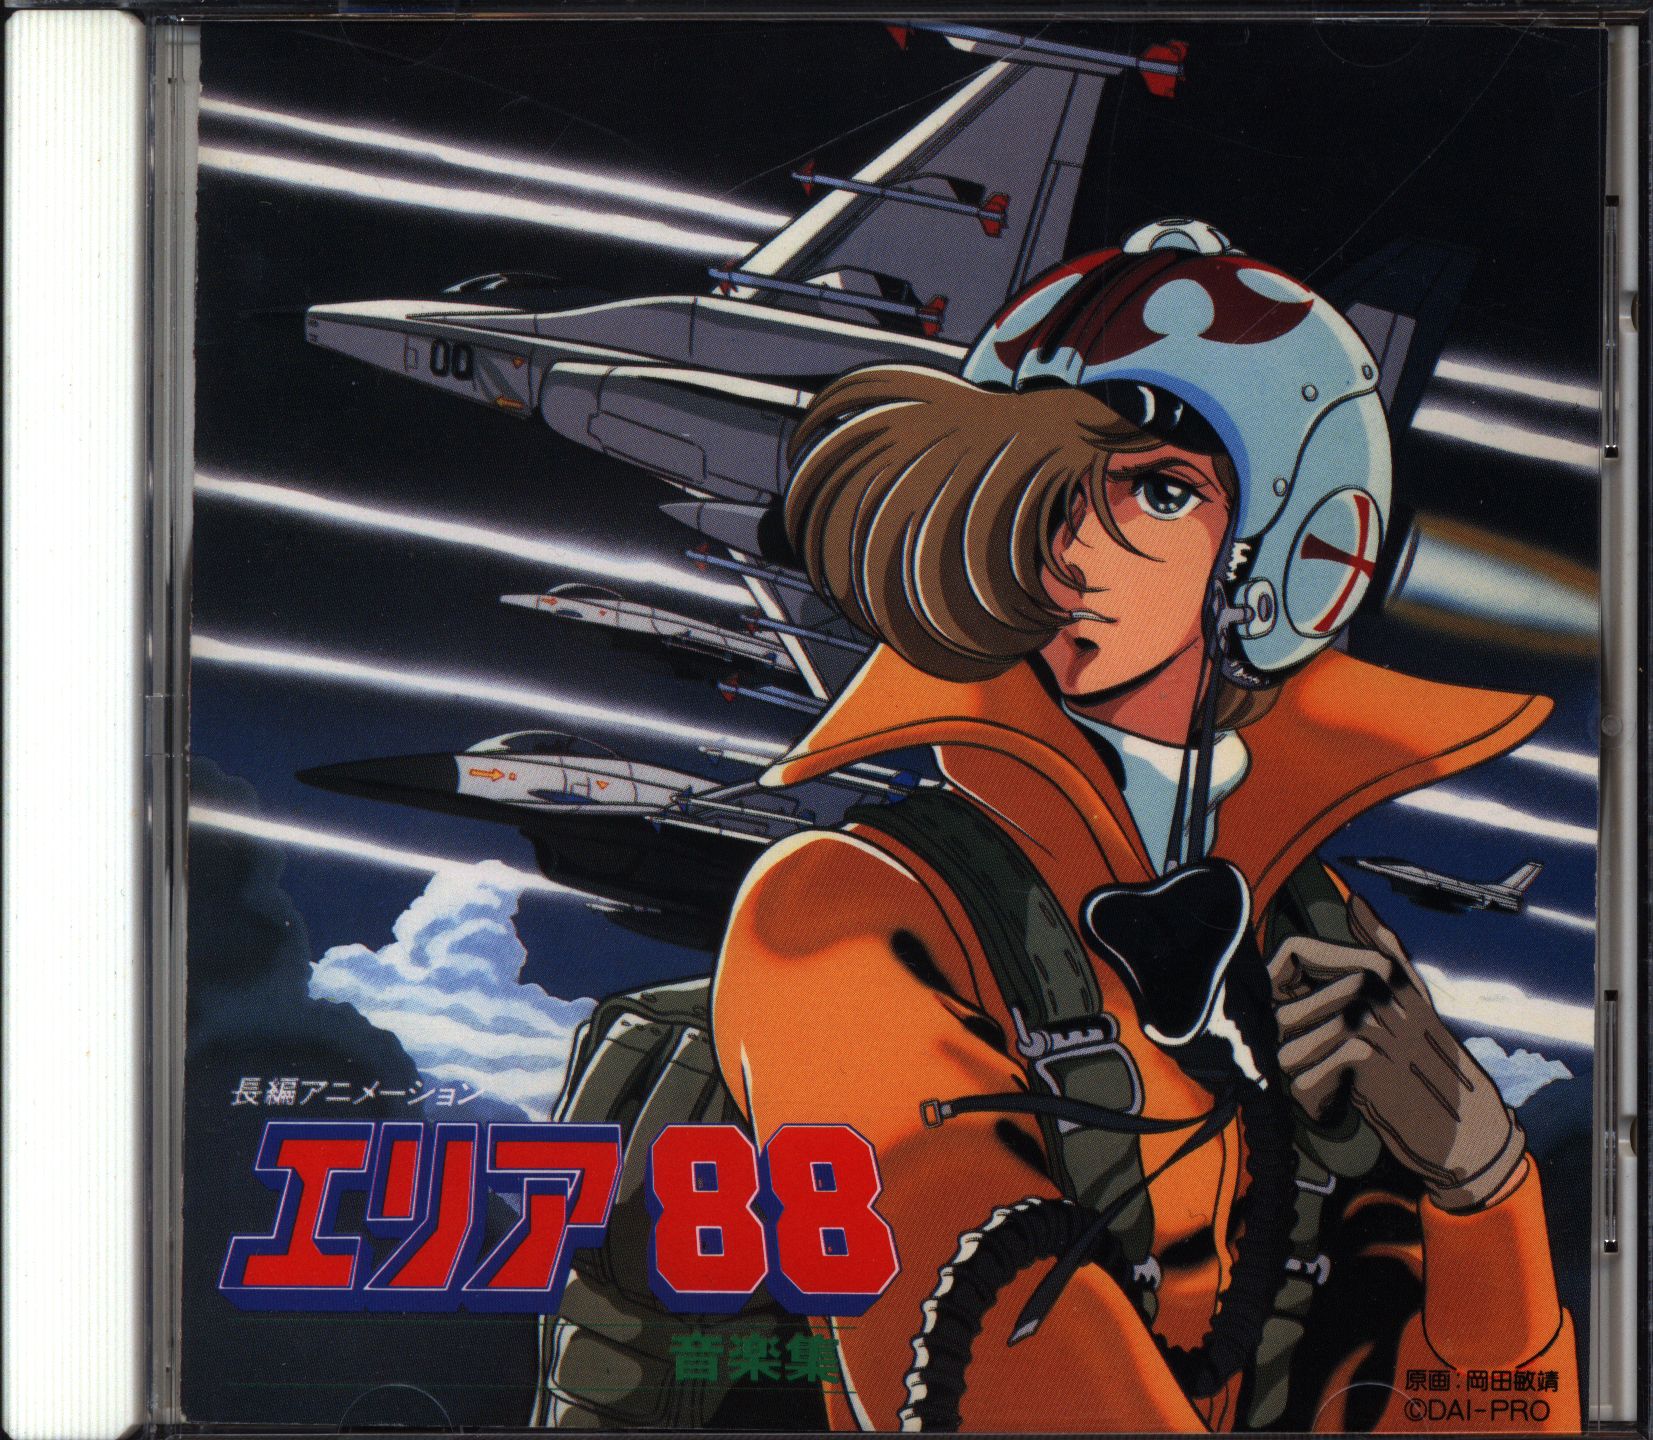 Anime CD Reprint Edition) Area 88 Feature Animation Music Collection |  Mandarake Online Shop